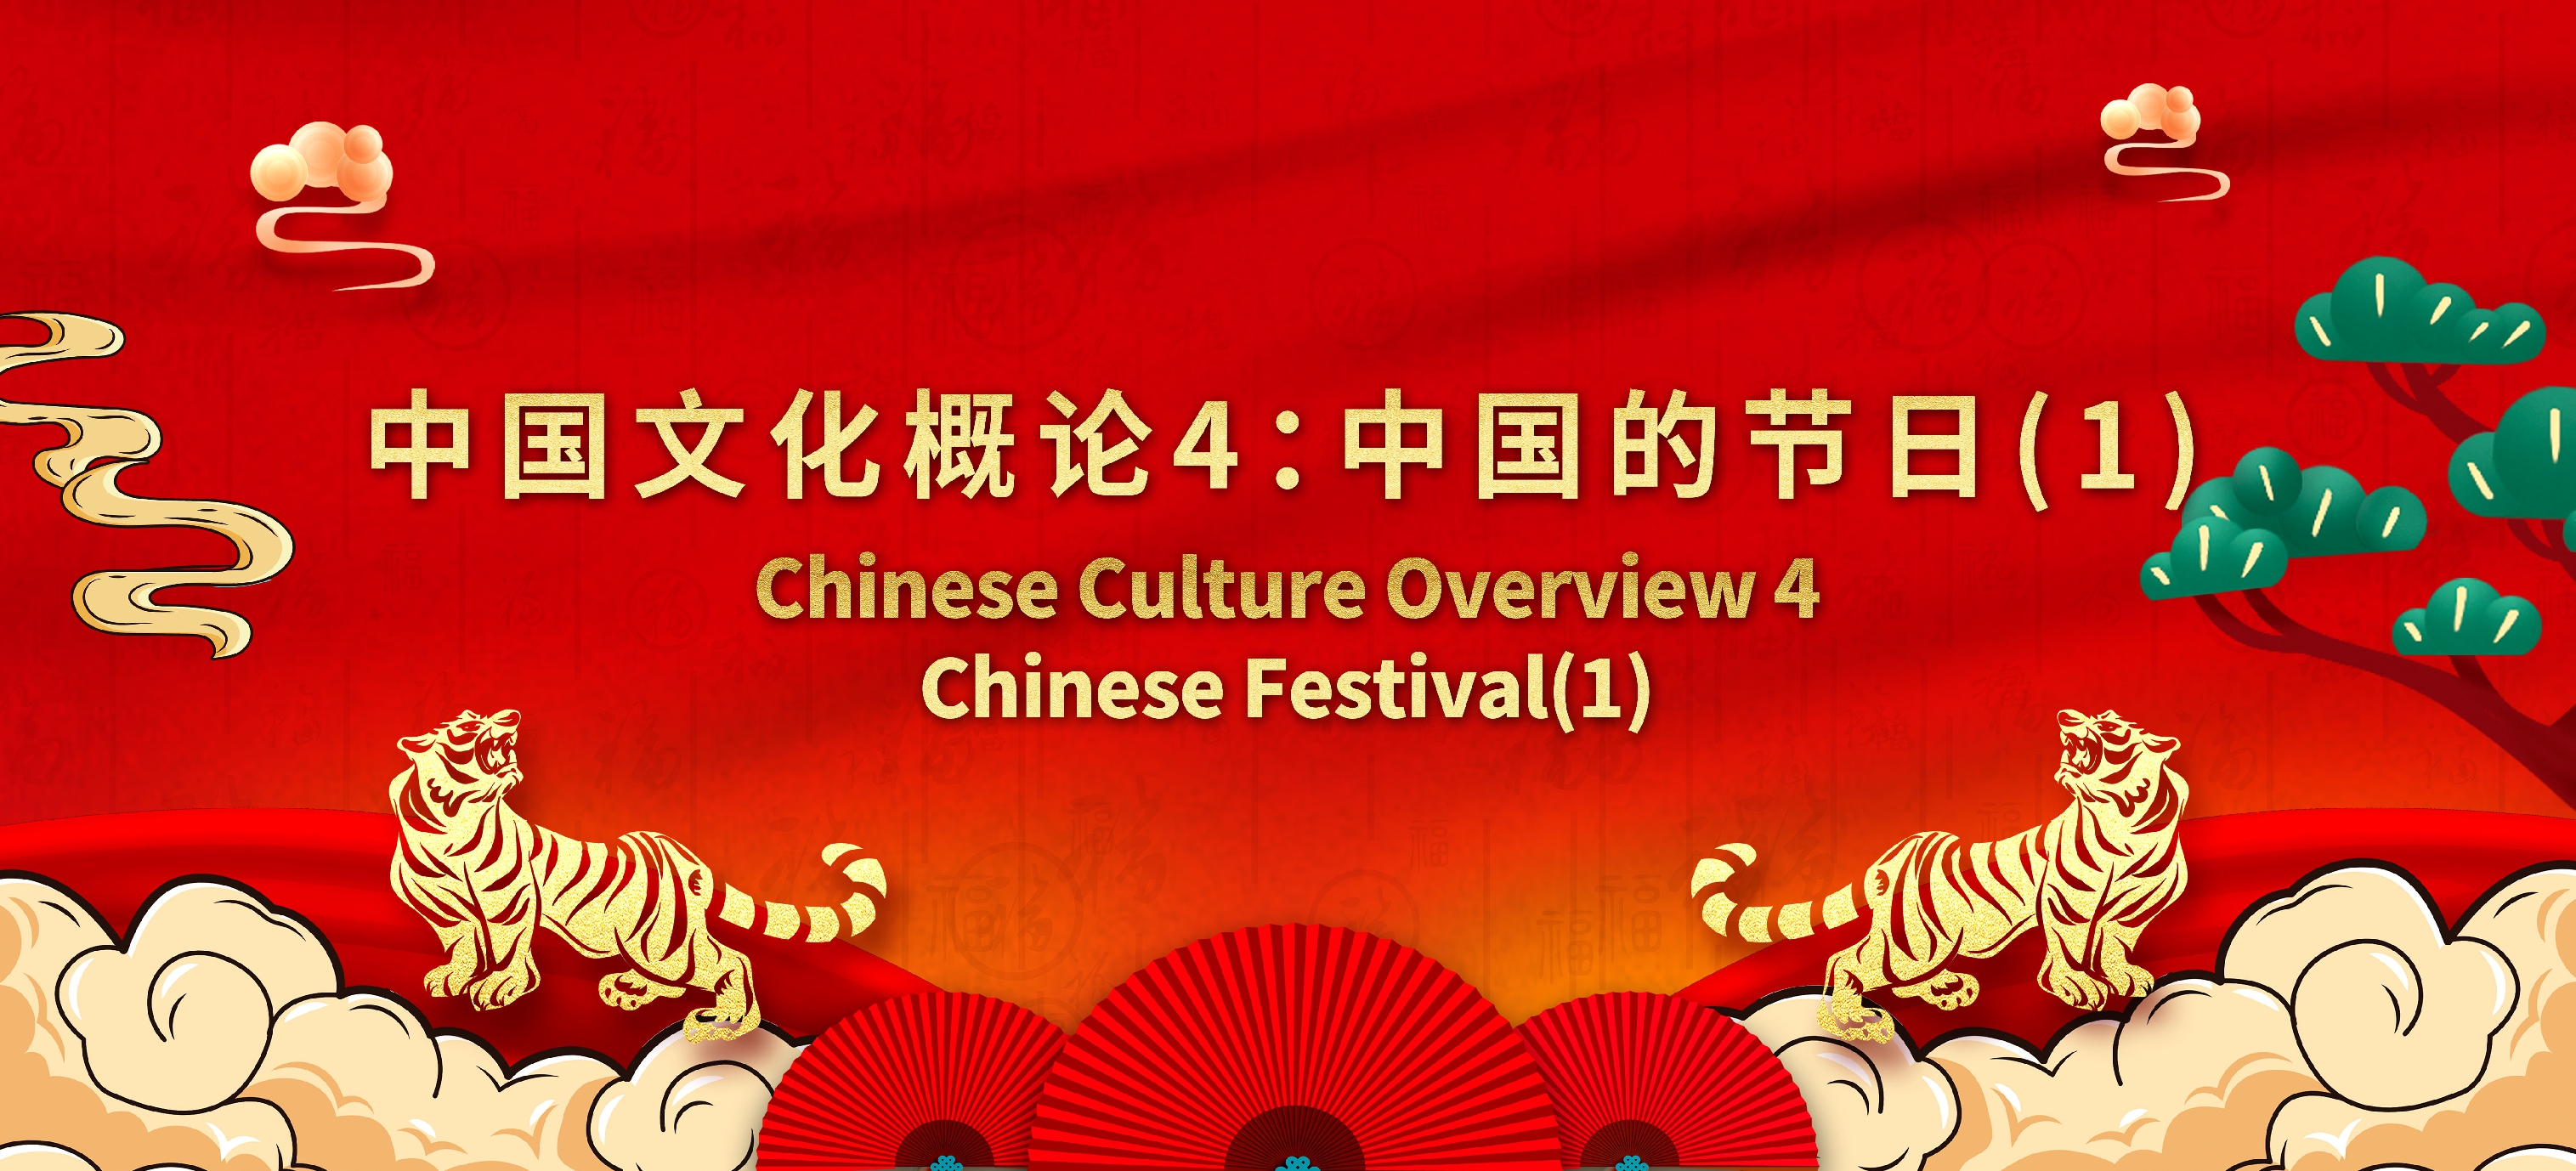 Chinese Festival(1)